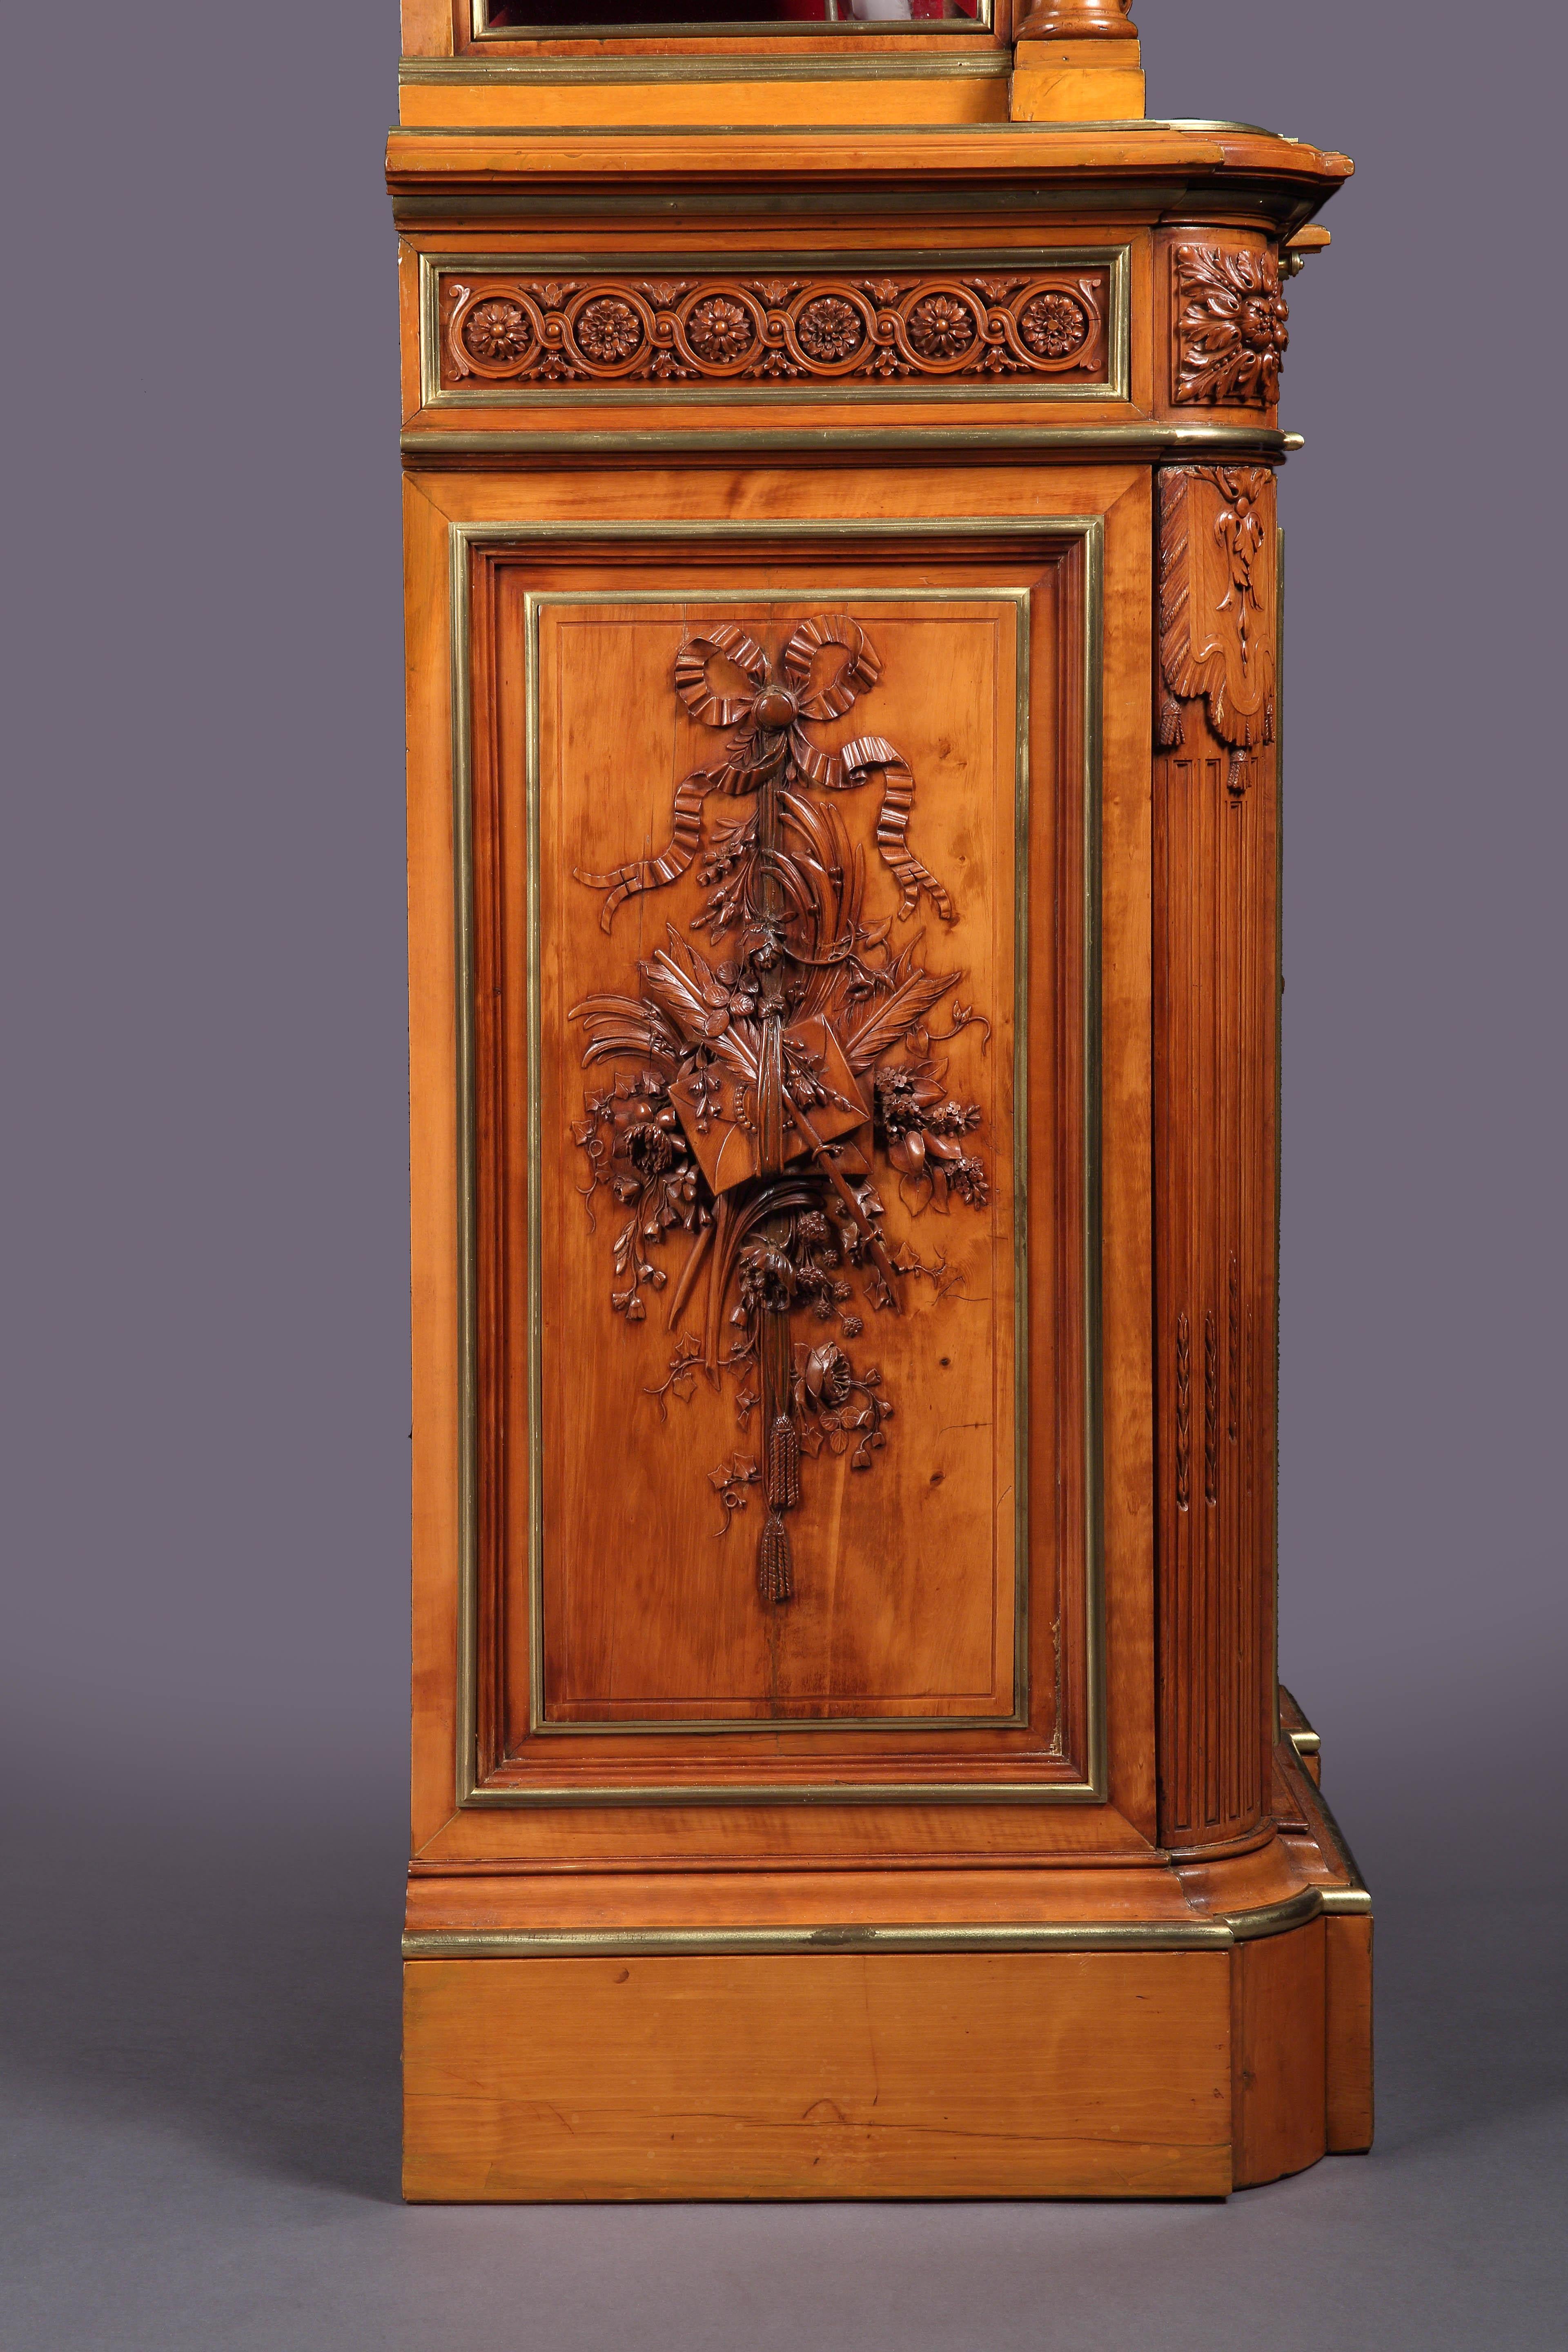 Napoleon III Extraordinary 19th Century Carved Cabinet by Maison Guéret of Paris For Sale